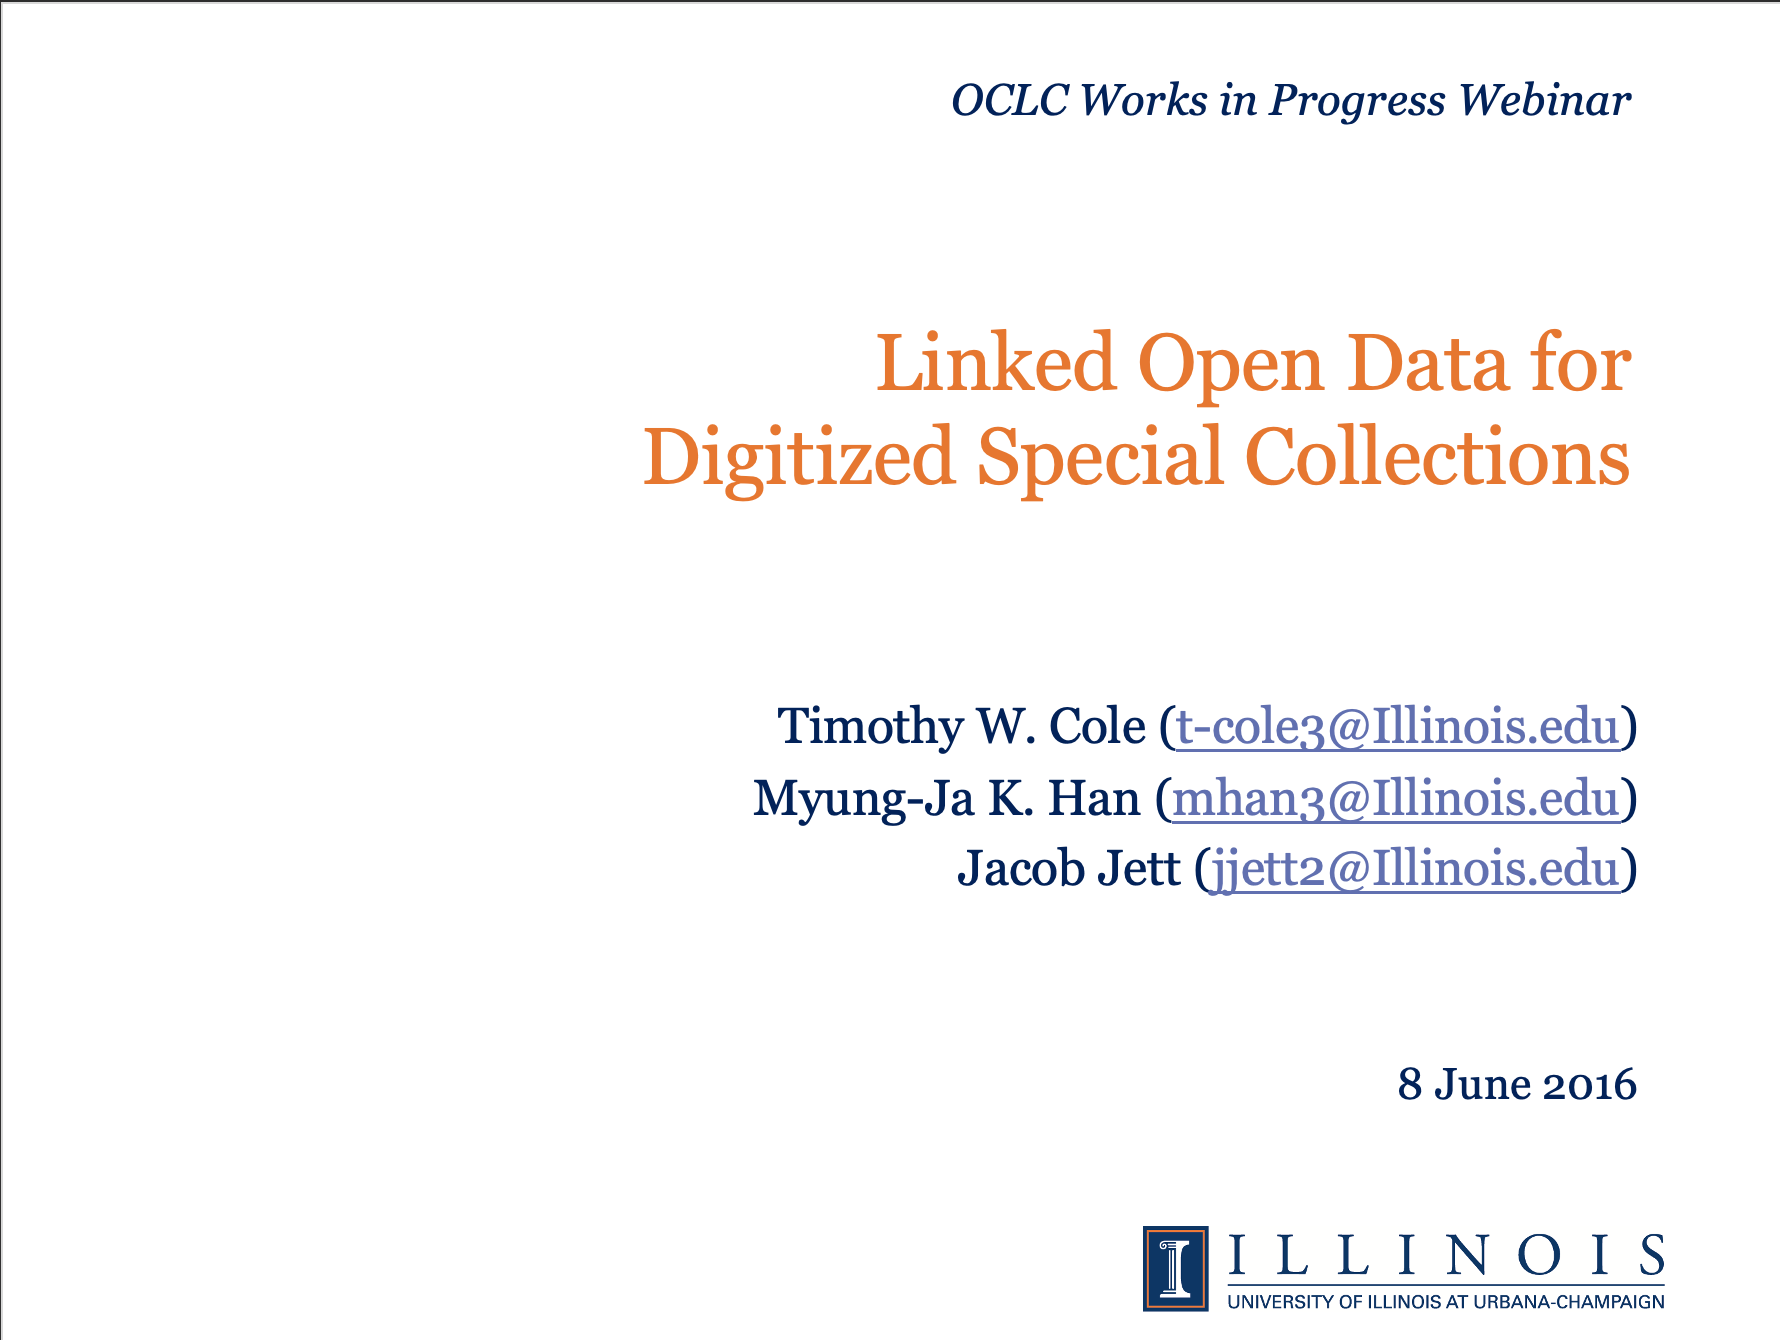 Linked Open Data for Digitized Special Collections